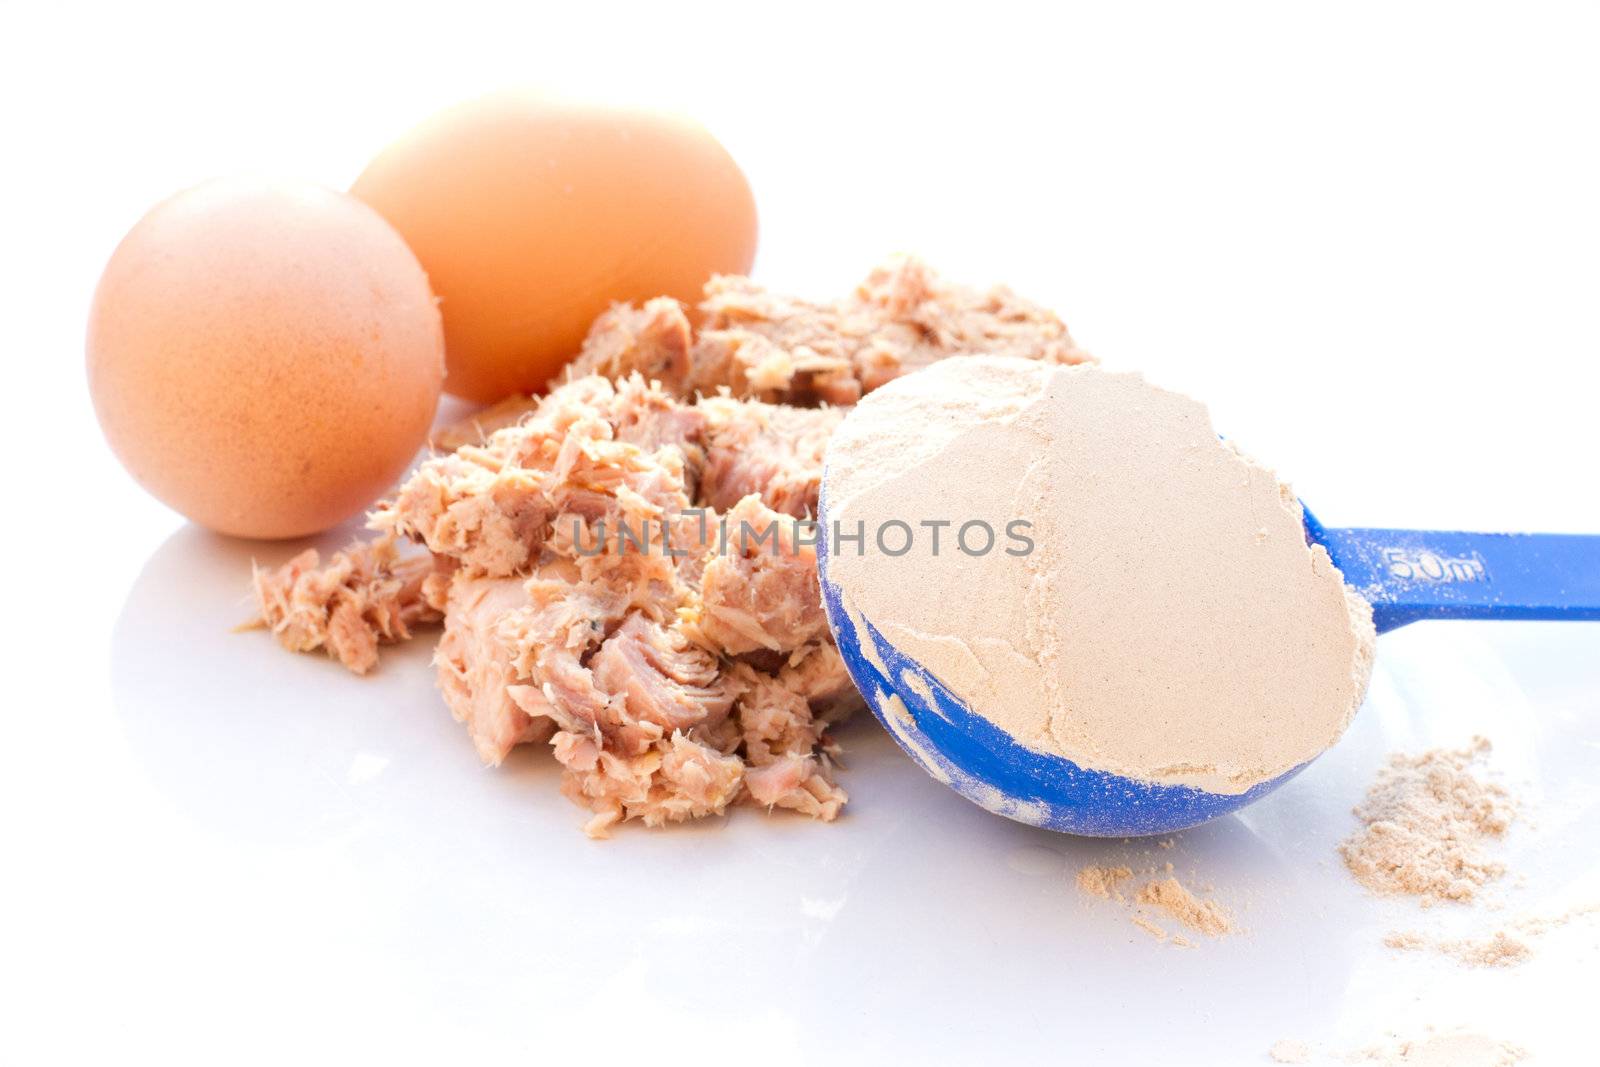 Tuna, egg and whey protein powder on a white plate by smikeymikey1